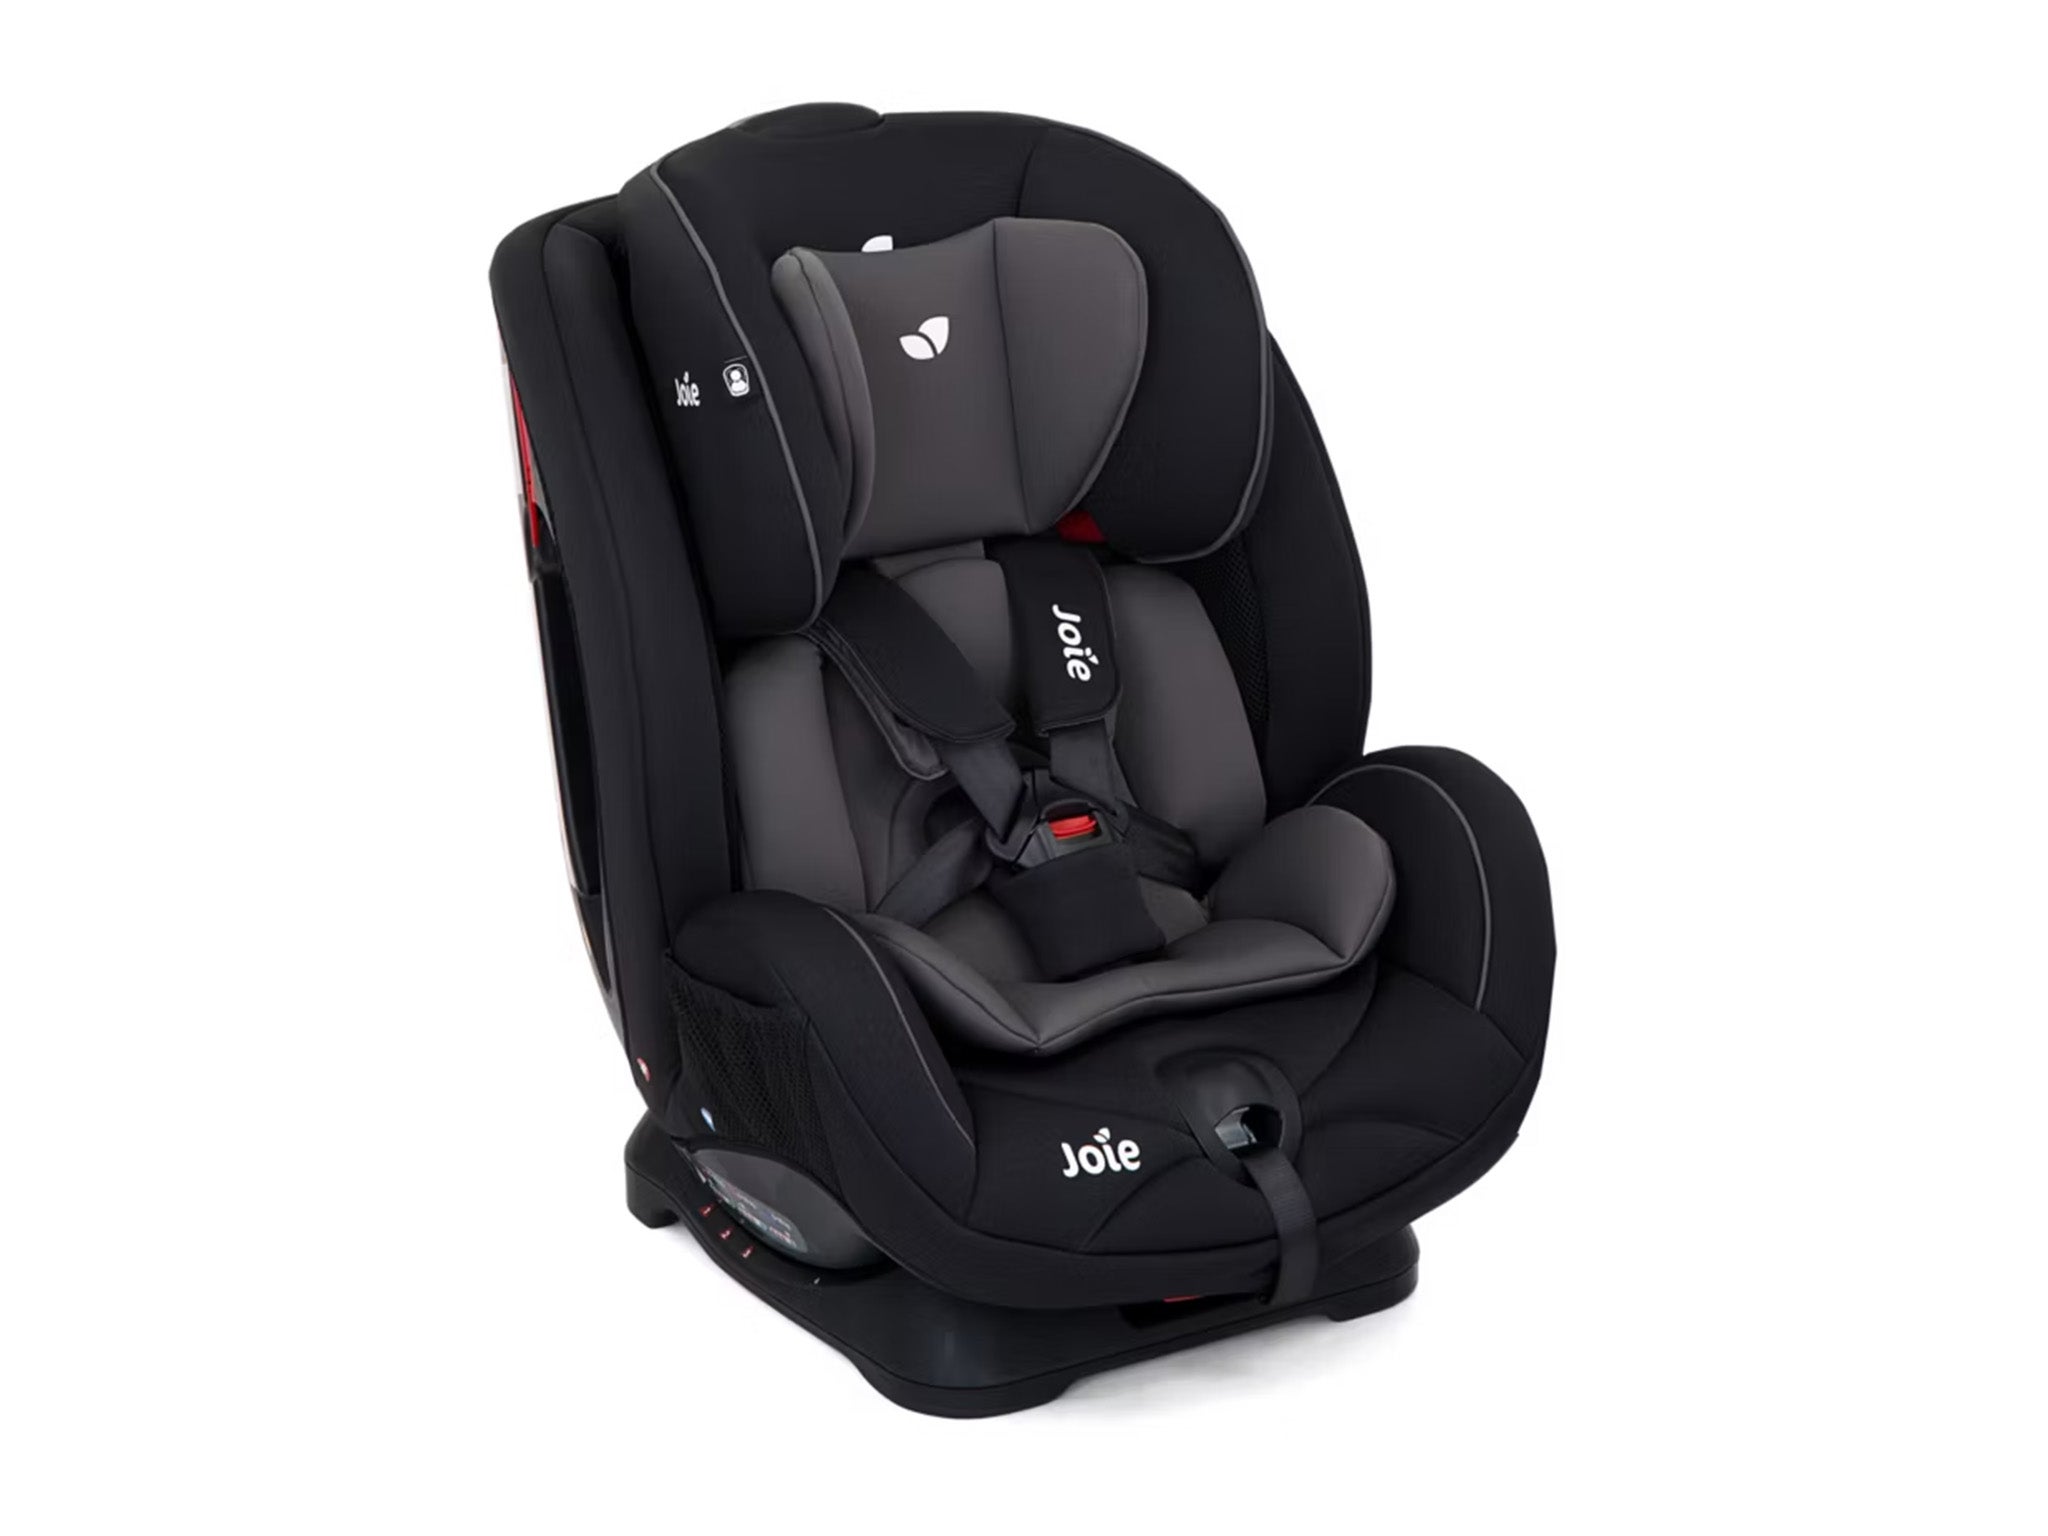 Joie Stages group 0+ car seat